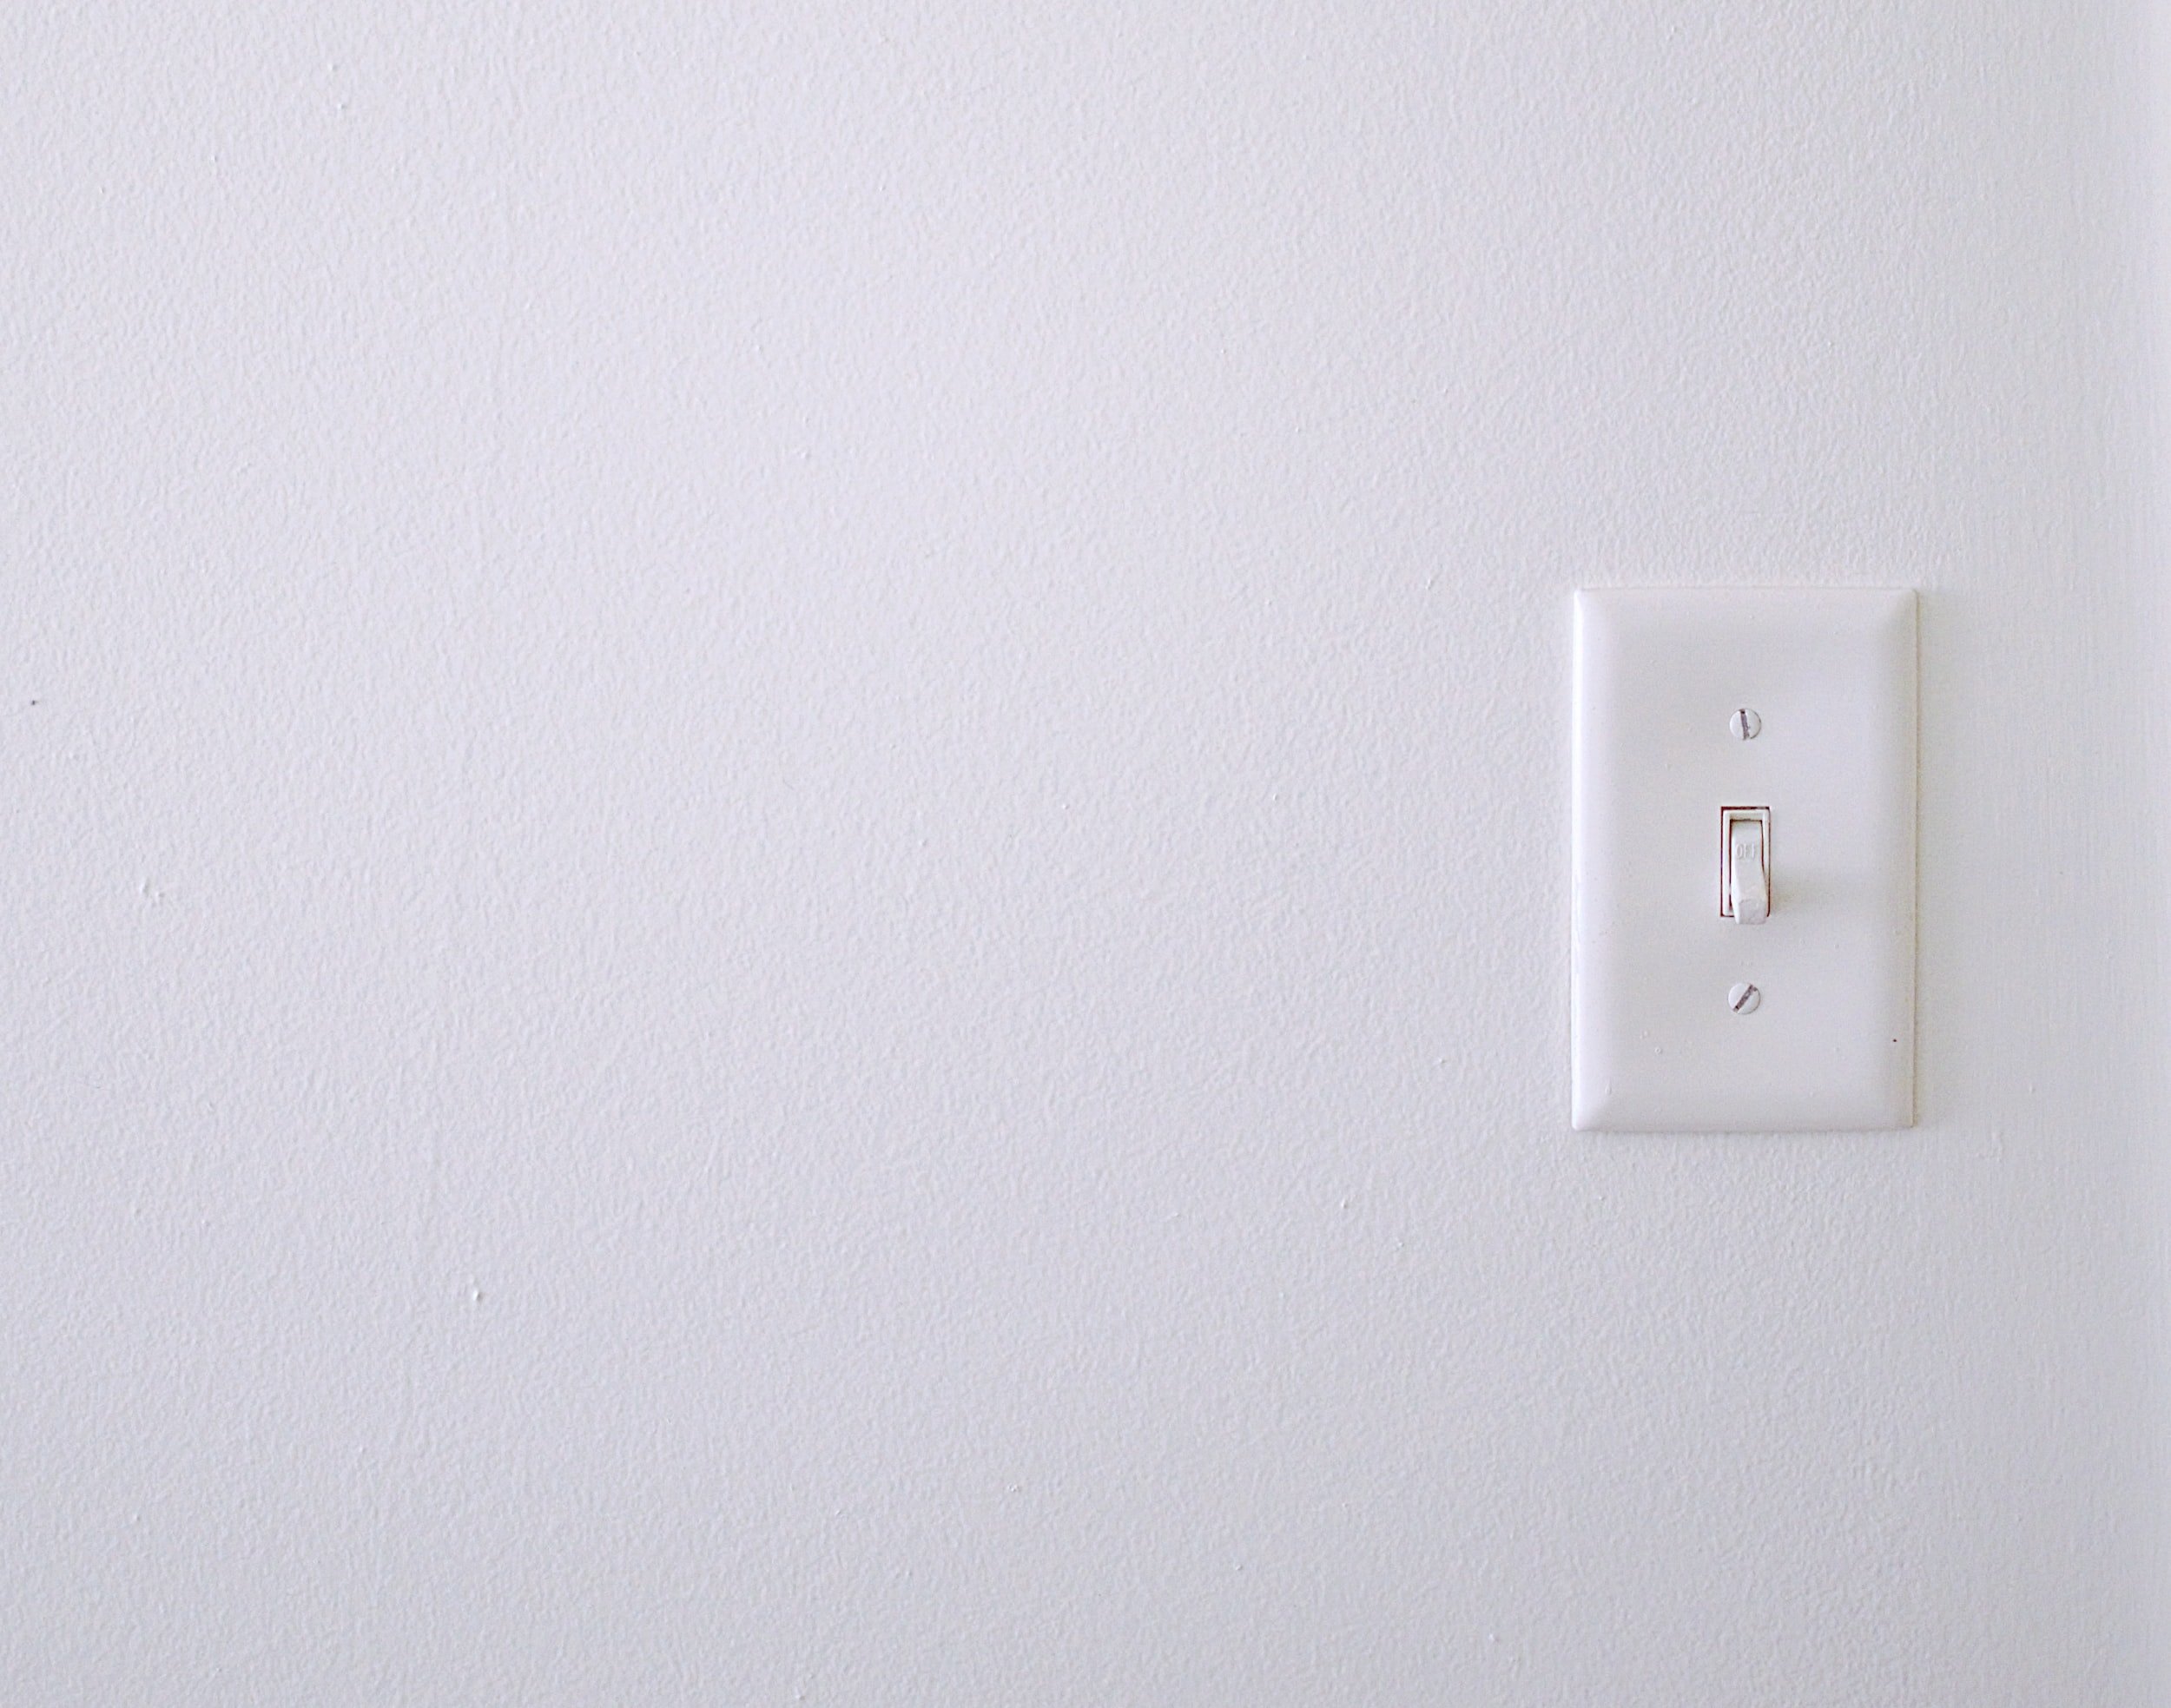 Why Does a Light Switch Make Noise? — Zimmerman Electric Company